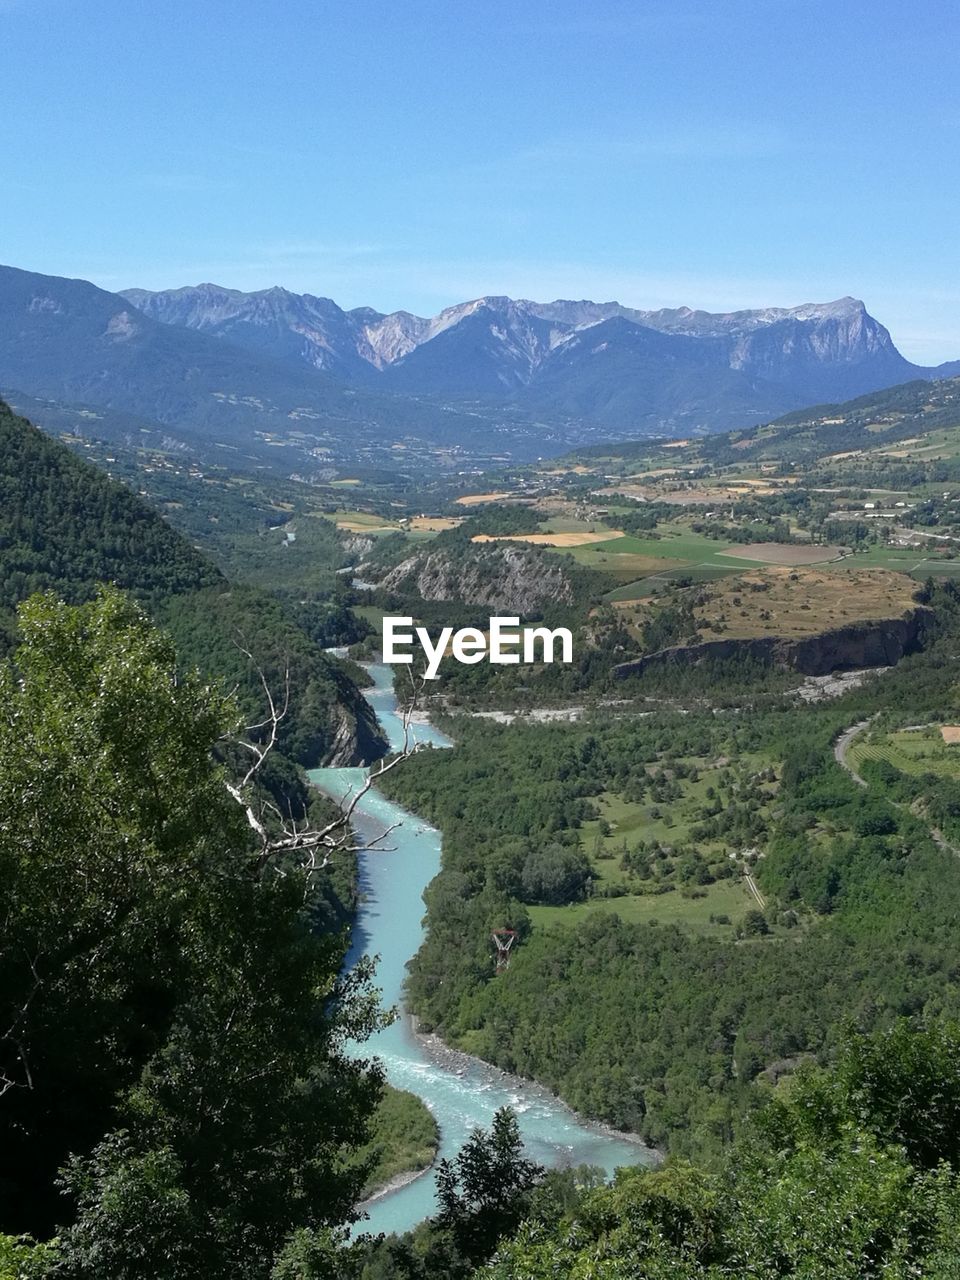 SCENIC VIEW OF RIVER AMIDST MOUNTAINS AGAINST SKY